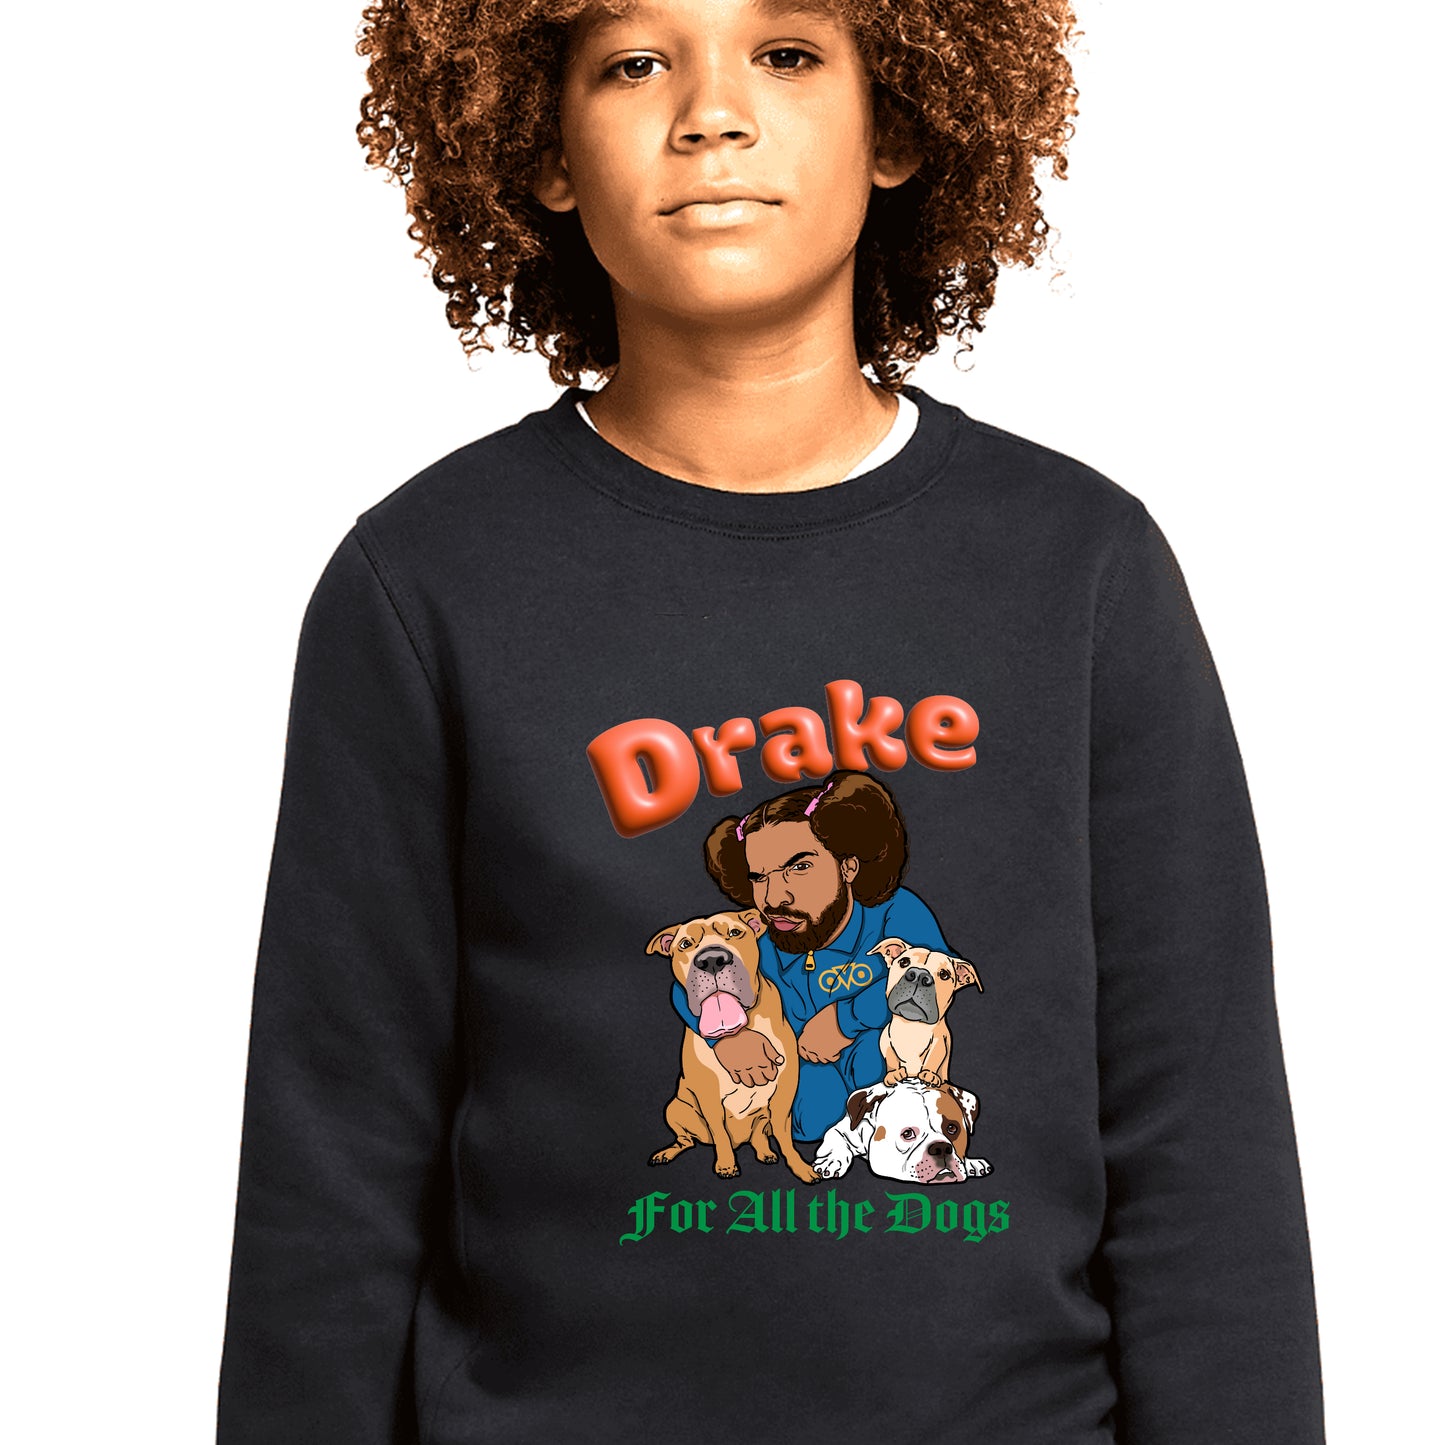 Drake Kid's Sweatshirt - For All The Dogs